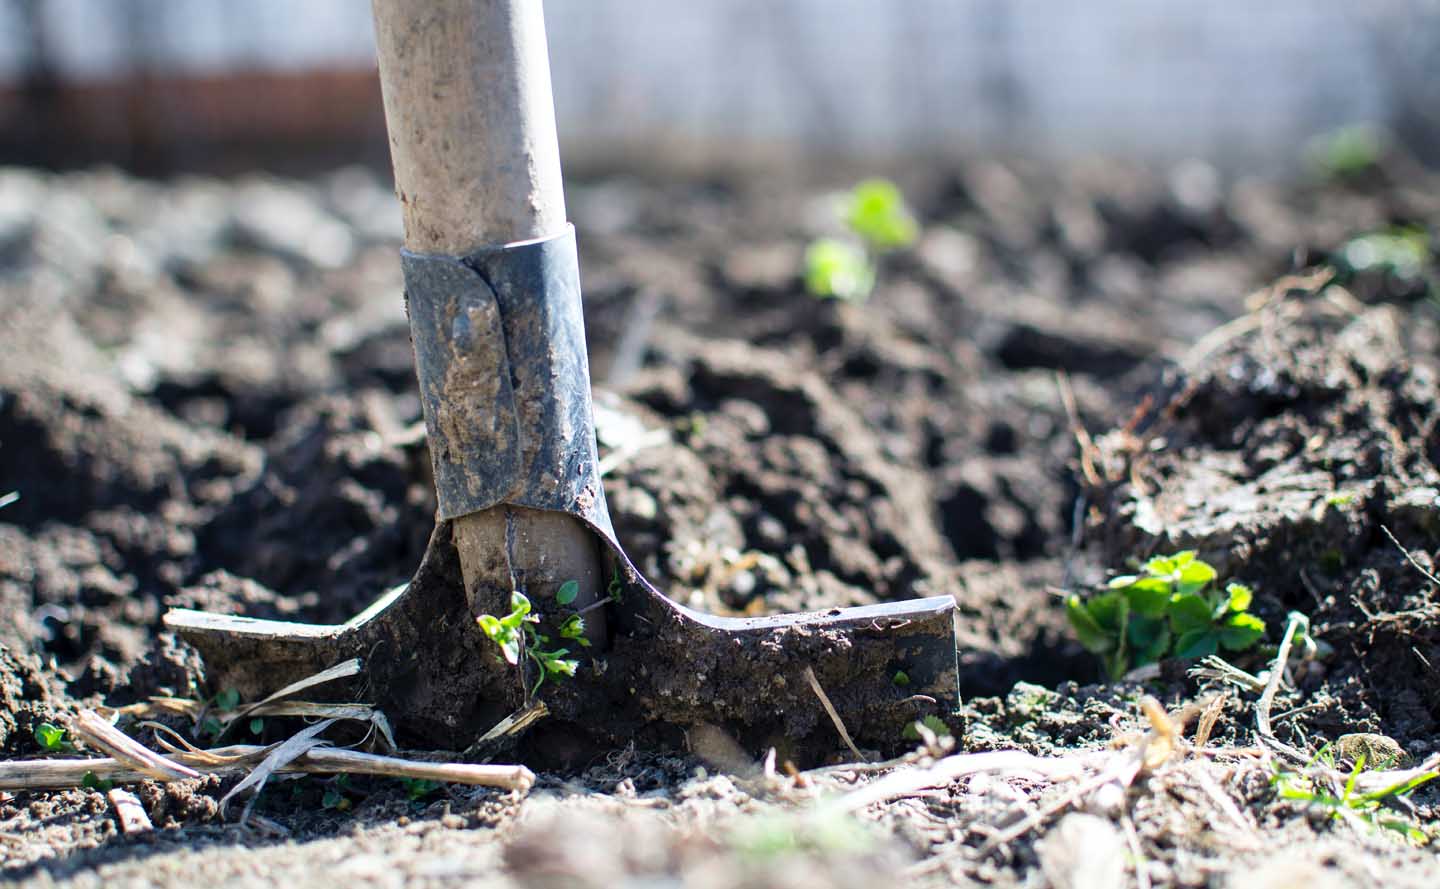 Loosing the soil with a spade - Photo by Lukas from Pexels